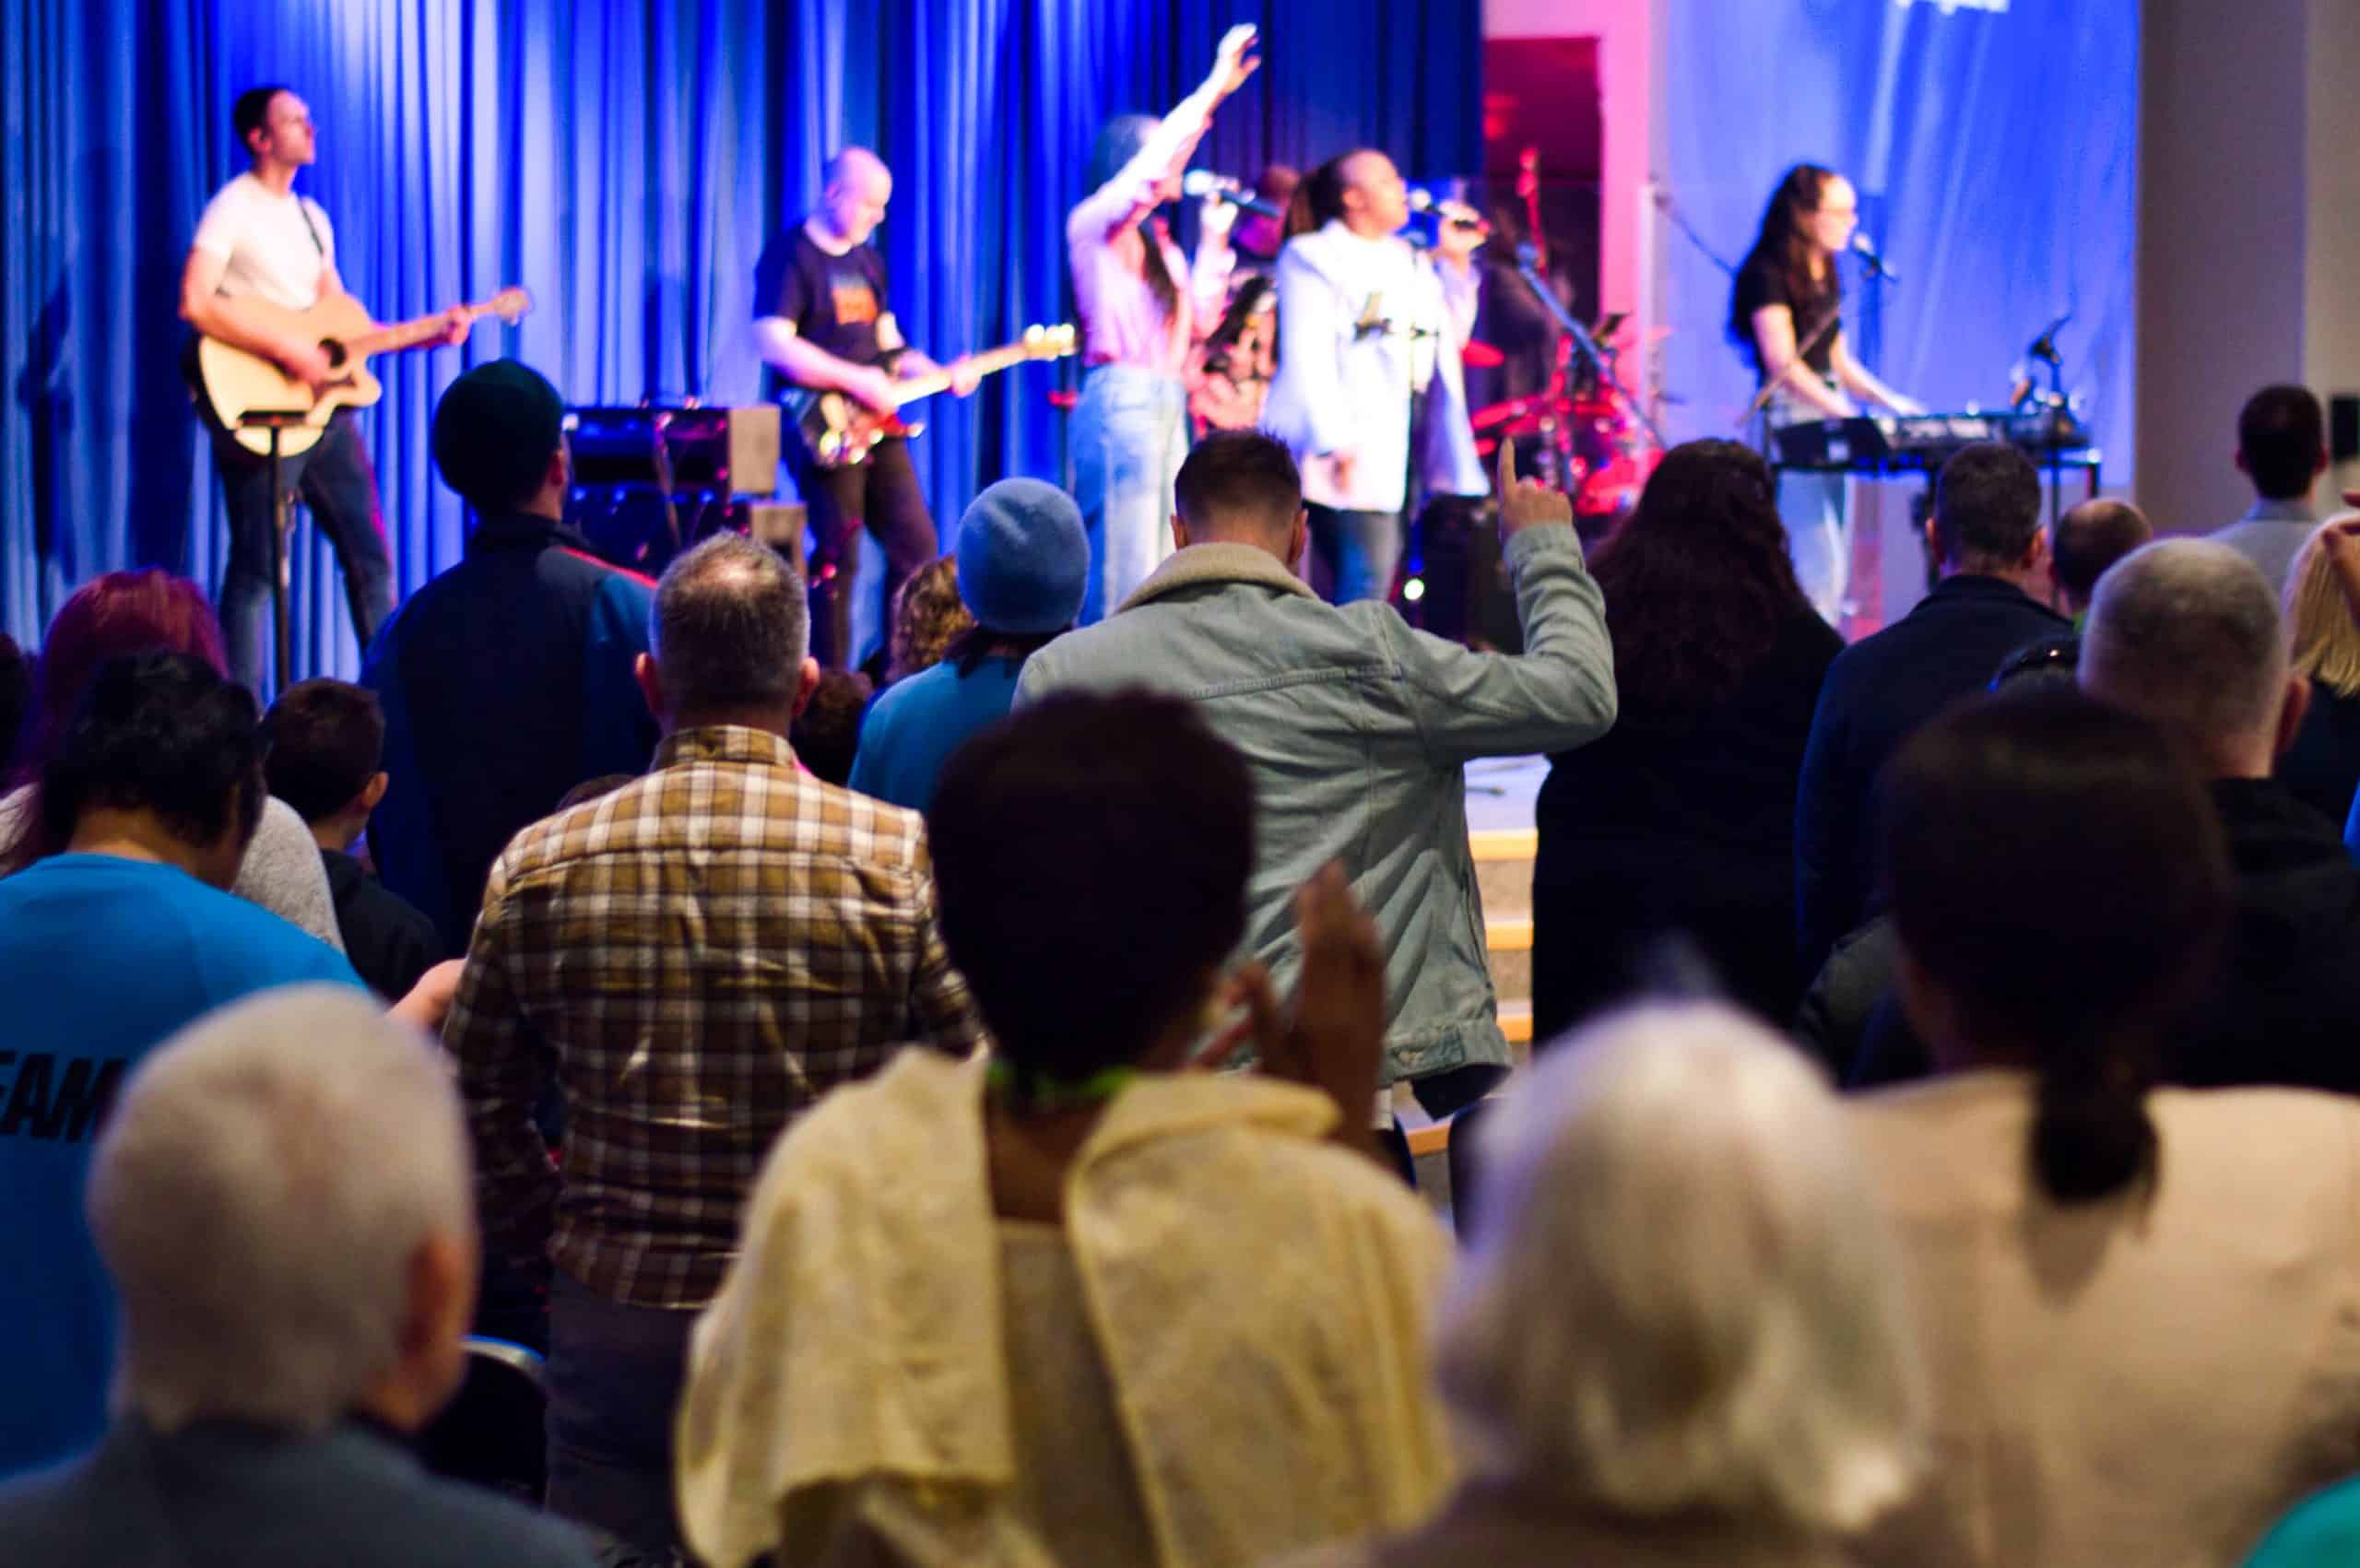 TVCC congregation worshiping on a Sunday Morning, in the background the Worship Team are leading worship on stage